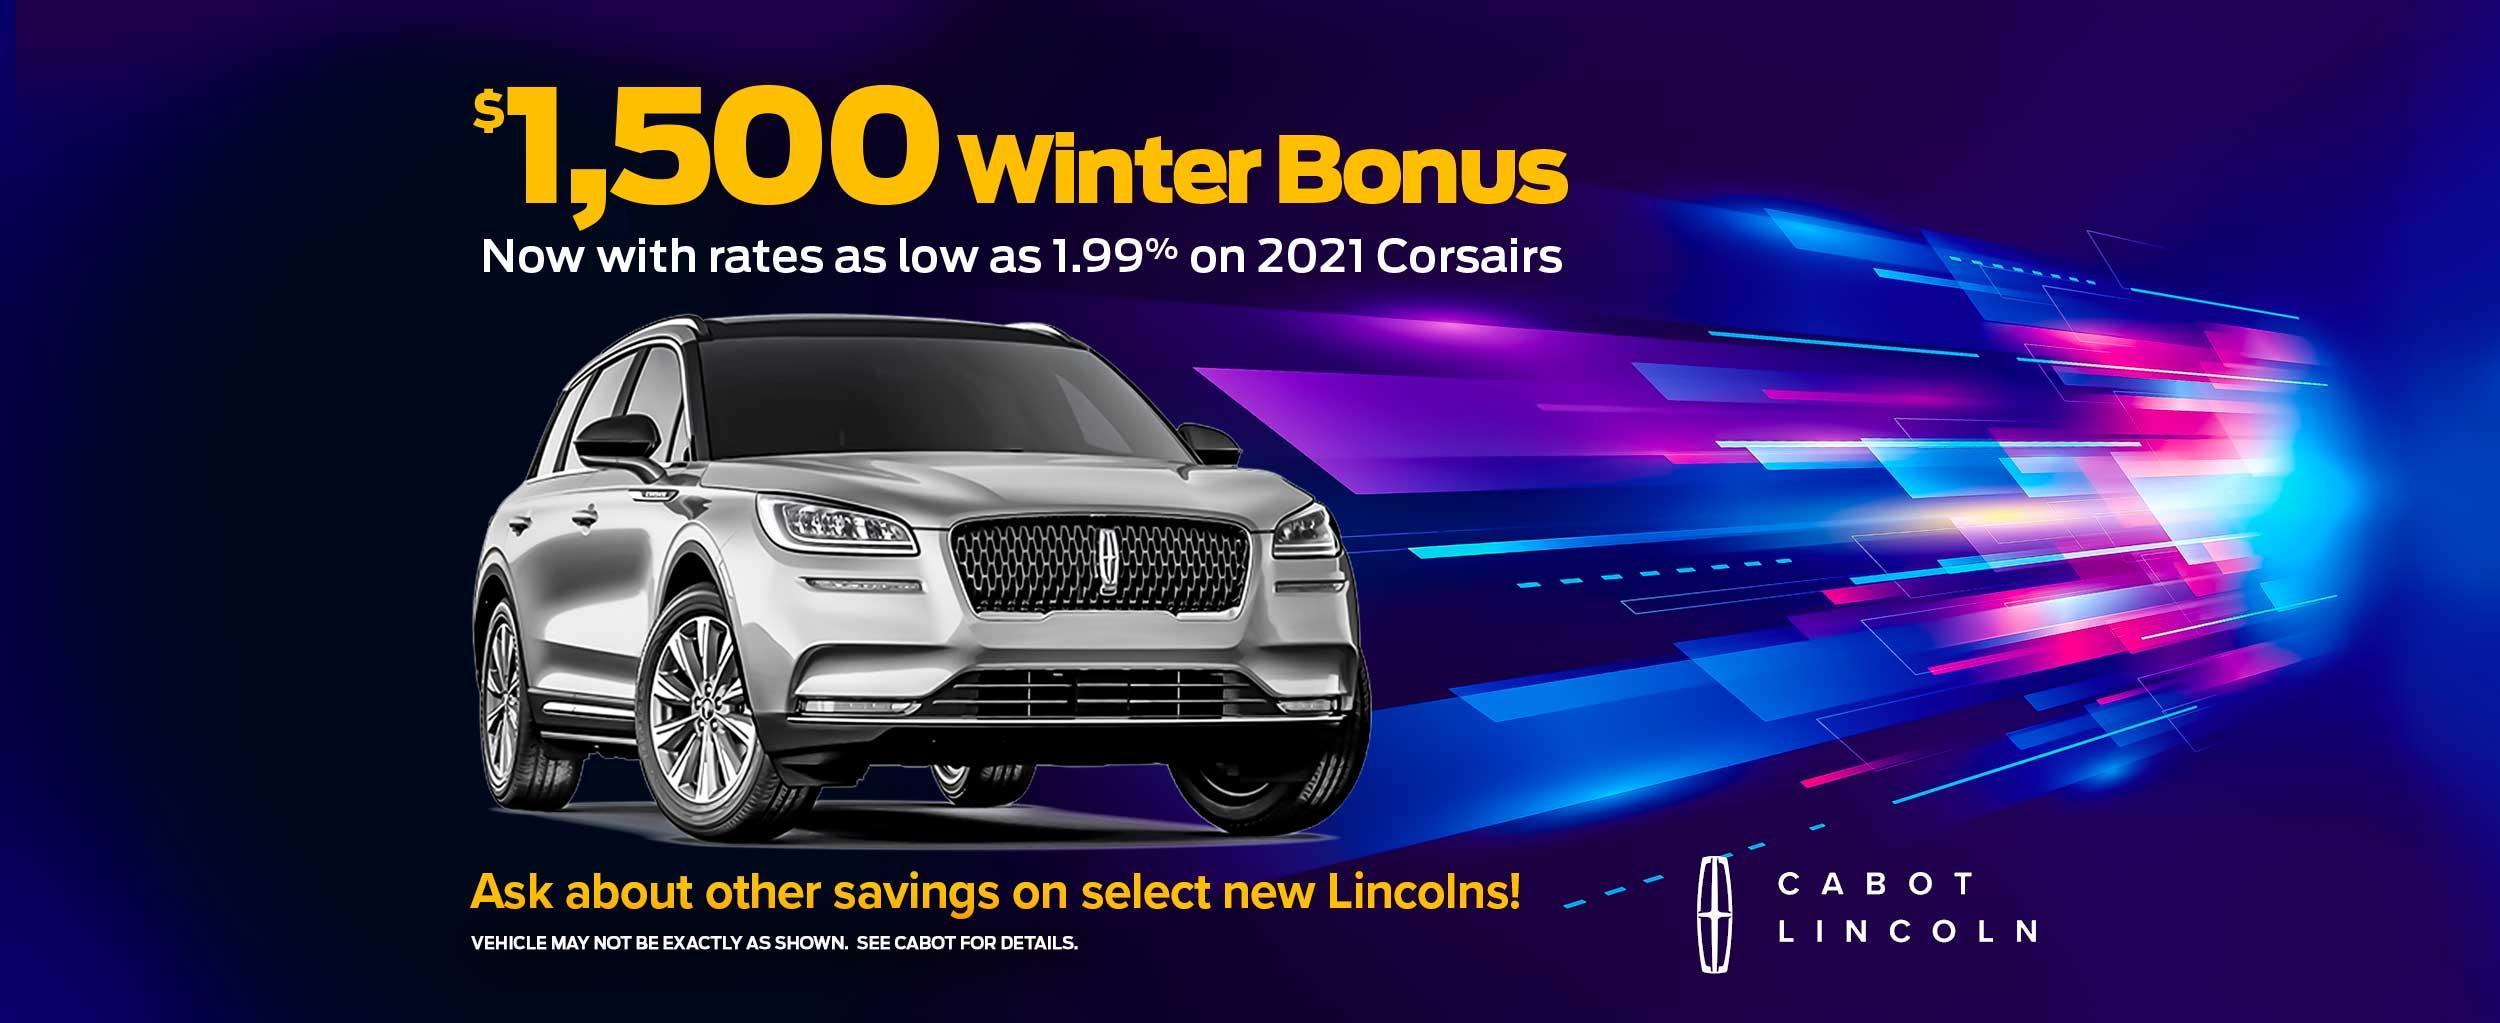 $1,500 WINTER BONUS and rates as low as 1.99% on 2021 Corsairs